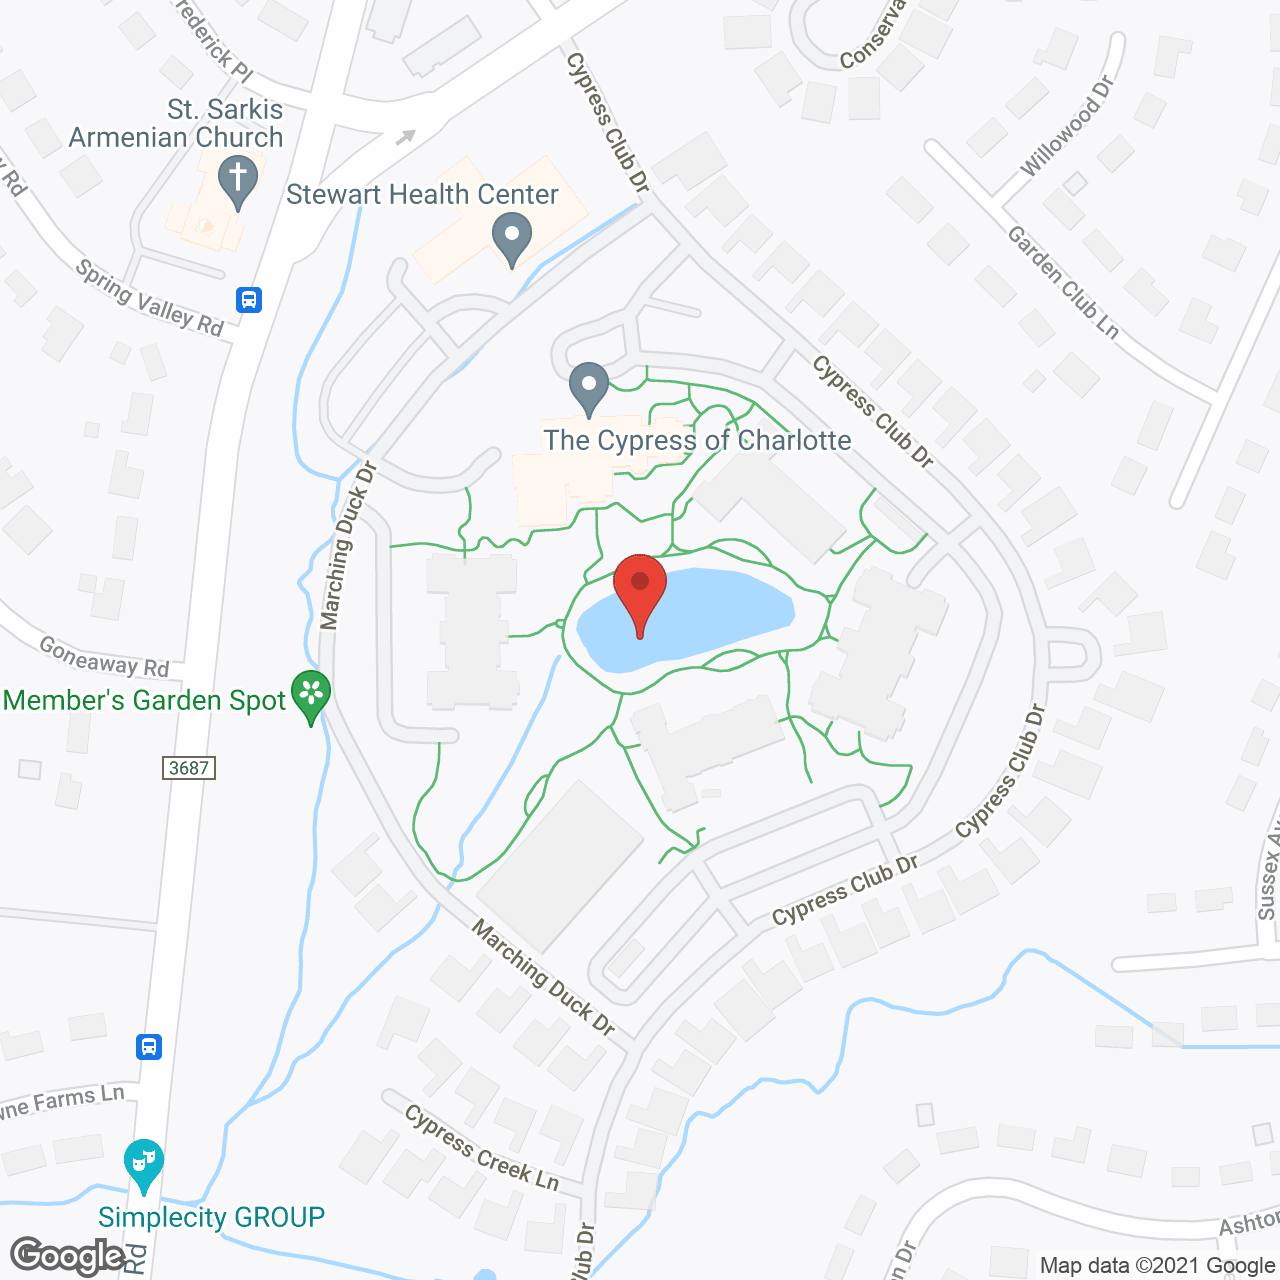 The Cypress At Charlotte in google map